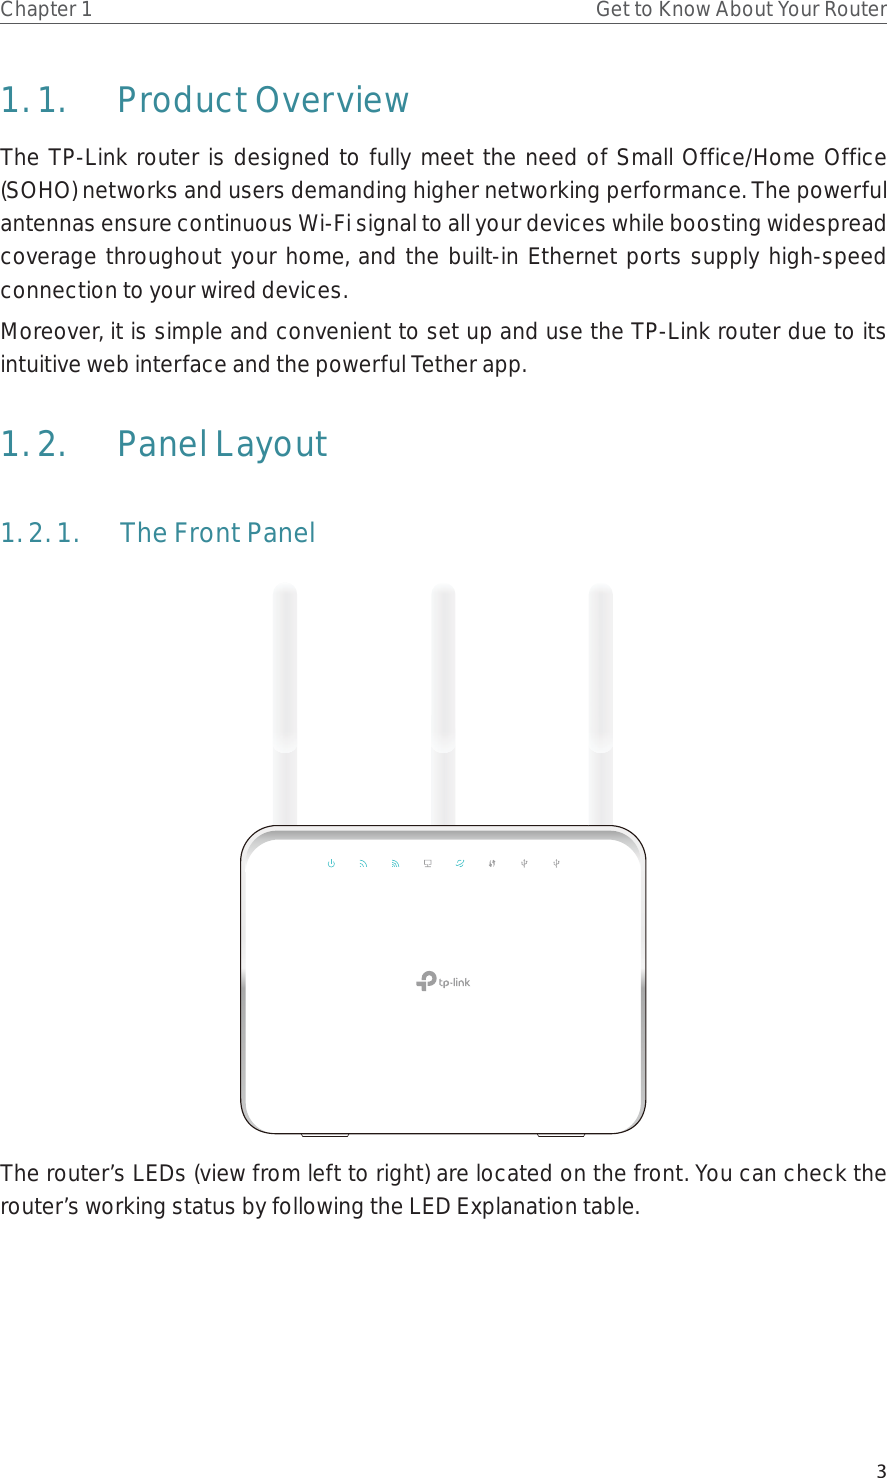 3Chapter 1 Get to Know About Your Router1. 1.  Product OverviewThe TP-Link router is designed to fully meet the need of Small Office/Home Office (SOHO) networks and users demanding higher networking performance. The powerful antennas ensure continuous Wi-Fi signal to all your devices while boosting widespread coverage throughout your home, and the built-in Ethernet ports supply high-speed connection to your wired devices.Moreover, it is simple and convenient to set up and use the TP-Link router due to its intuitive web interface and the powerful Tether app.  1. 2.  Panel Layout1. 2. 1.  The Front PanelThe router’s LEDs (view from left to right) are located on the front. You can check the router’s working status by following the LED Explanation table.